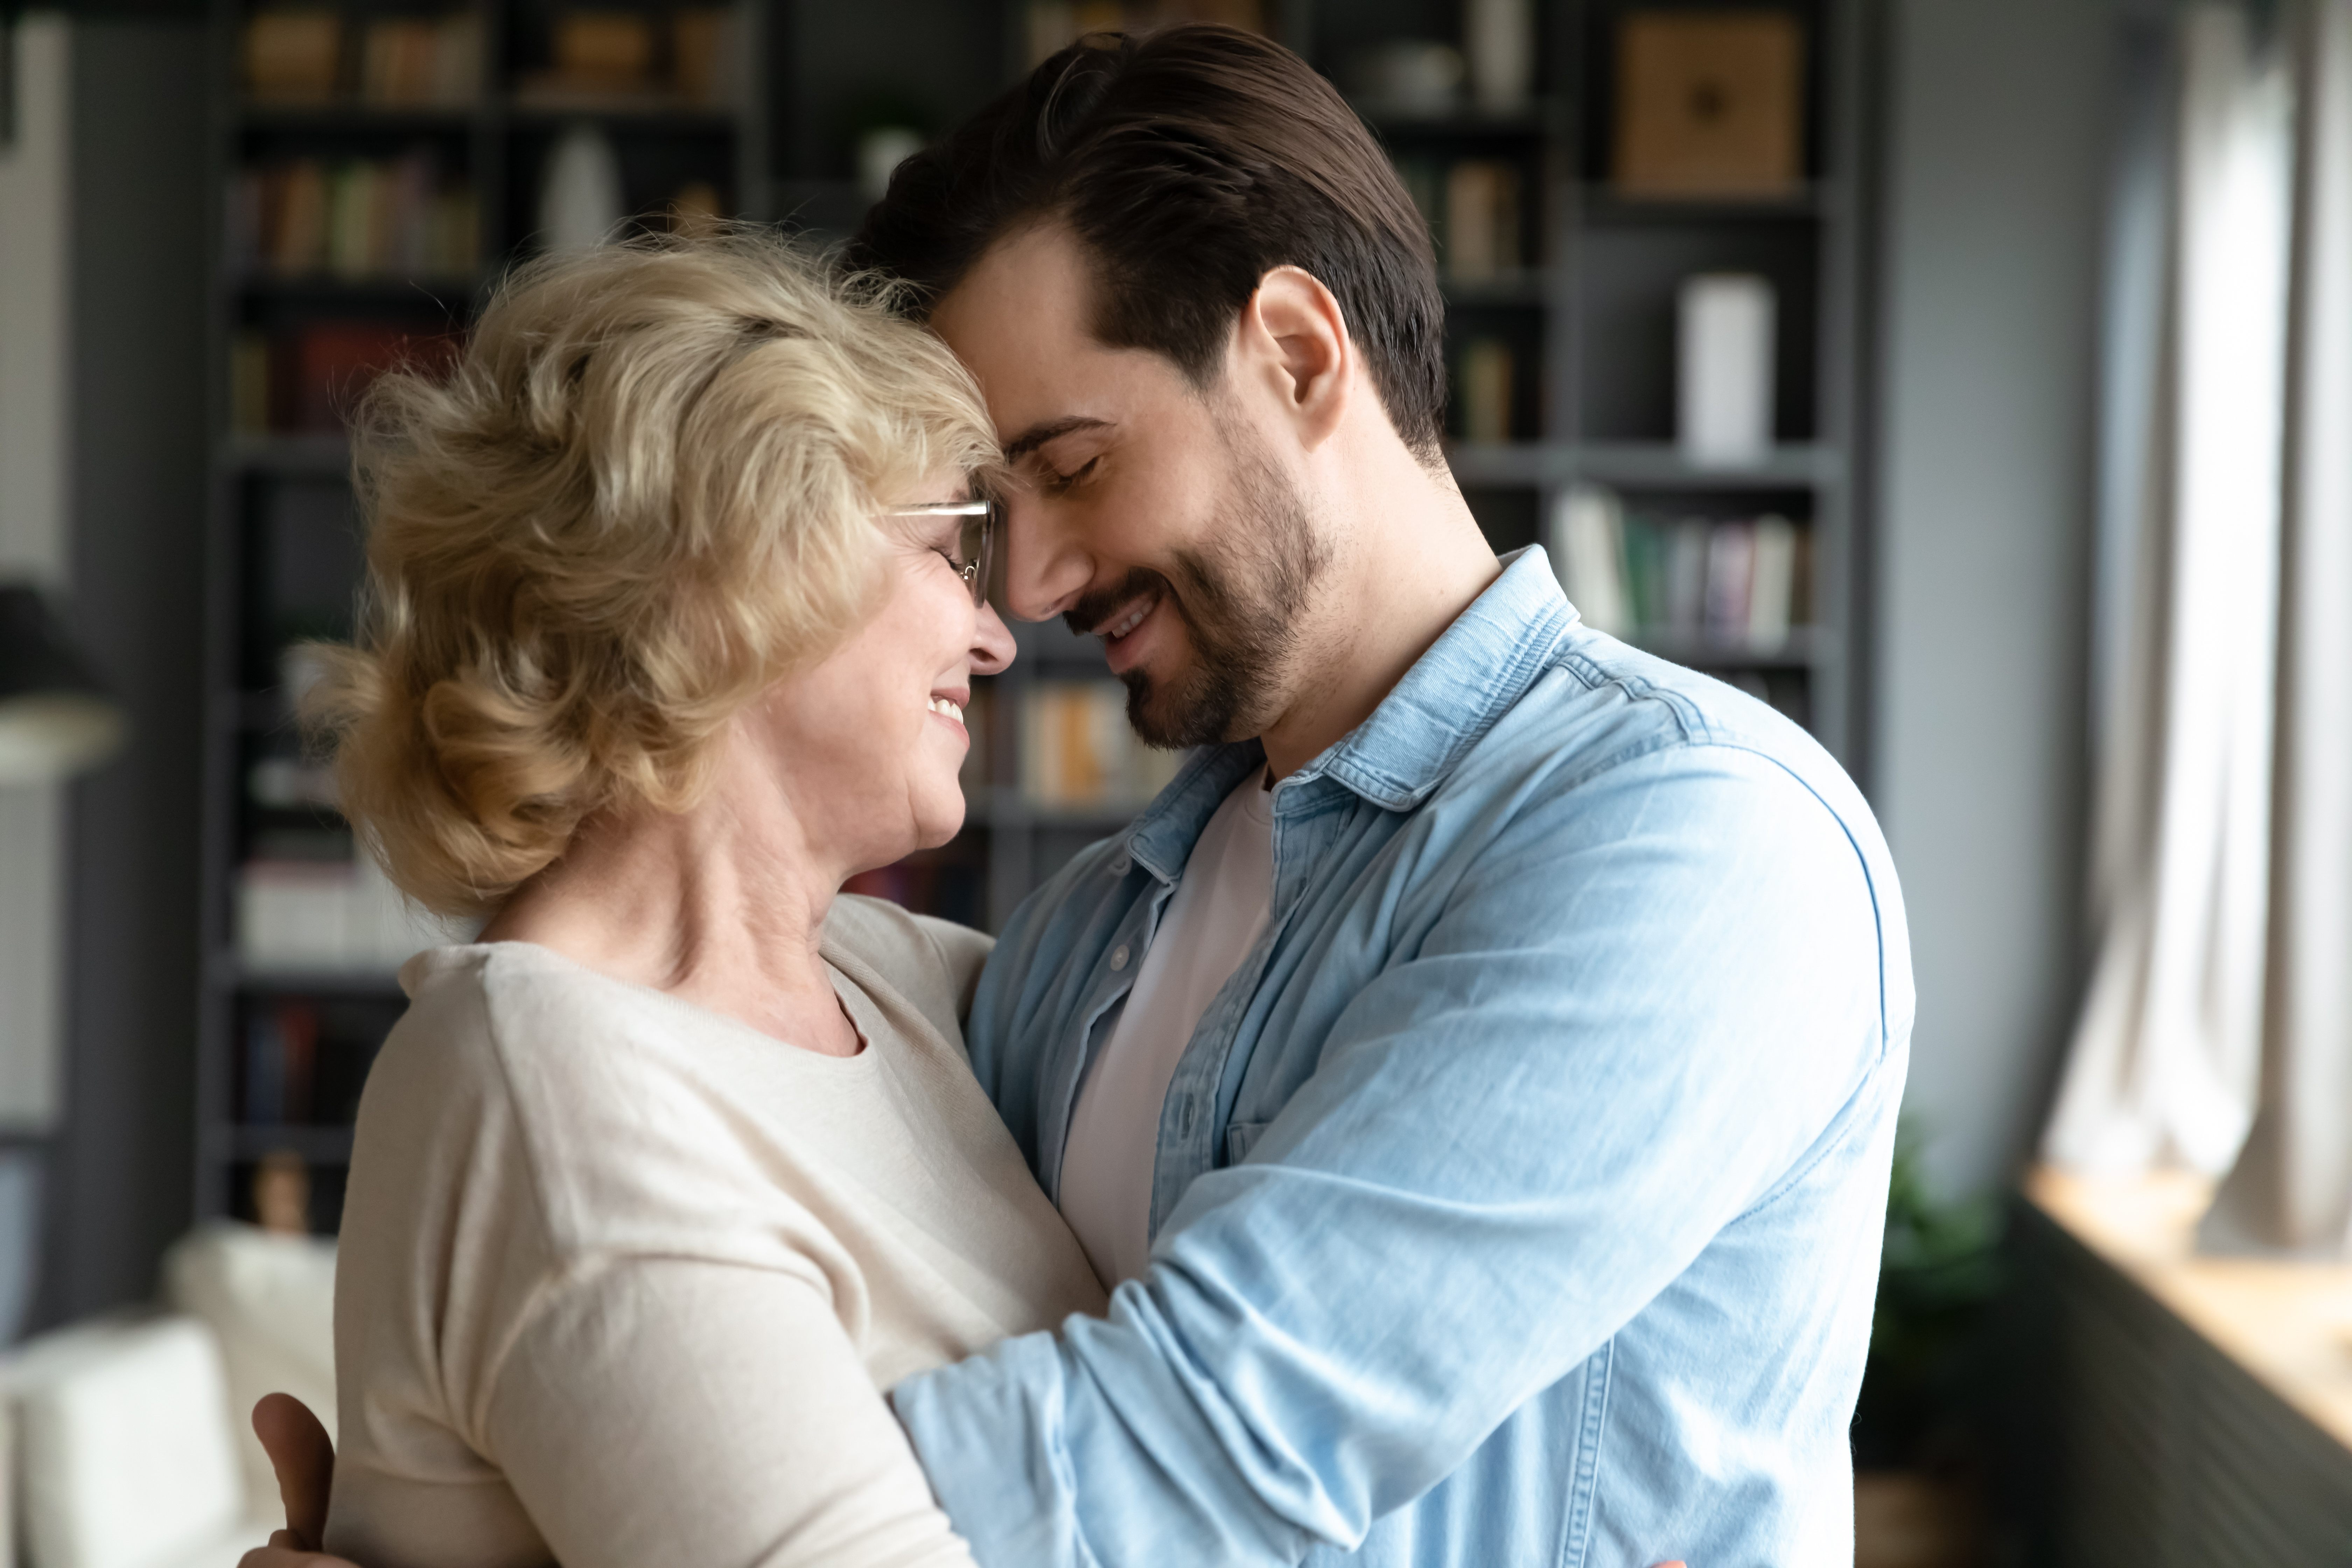 A young man happily embracing an older woman | Source: Shutterstock